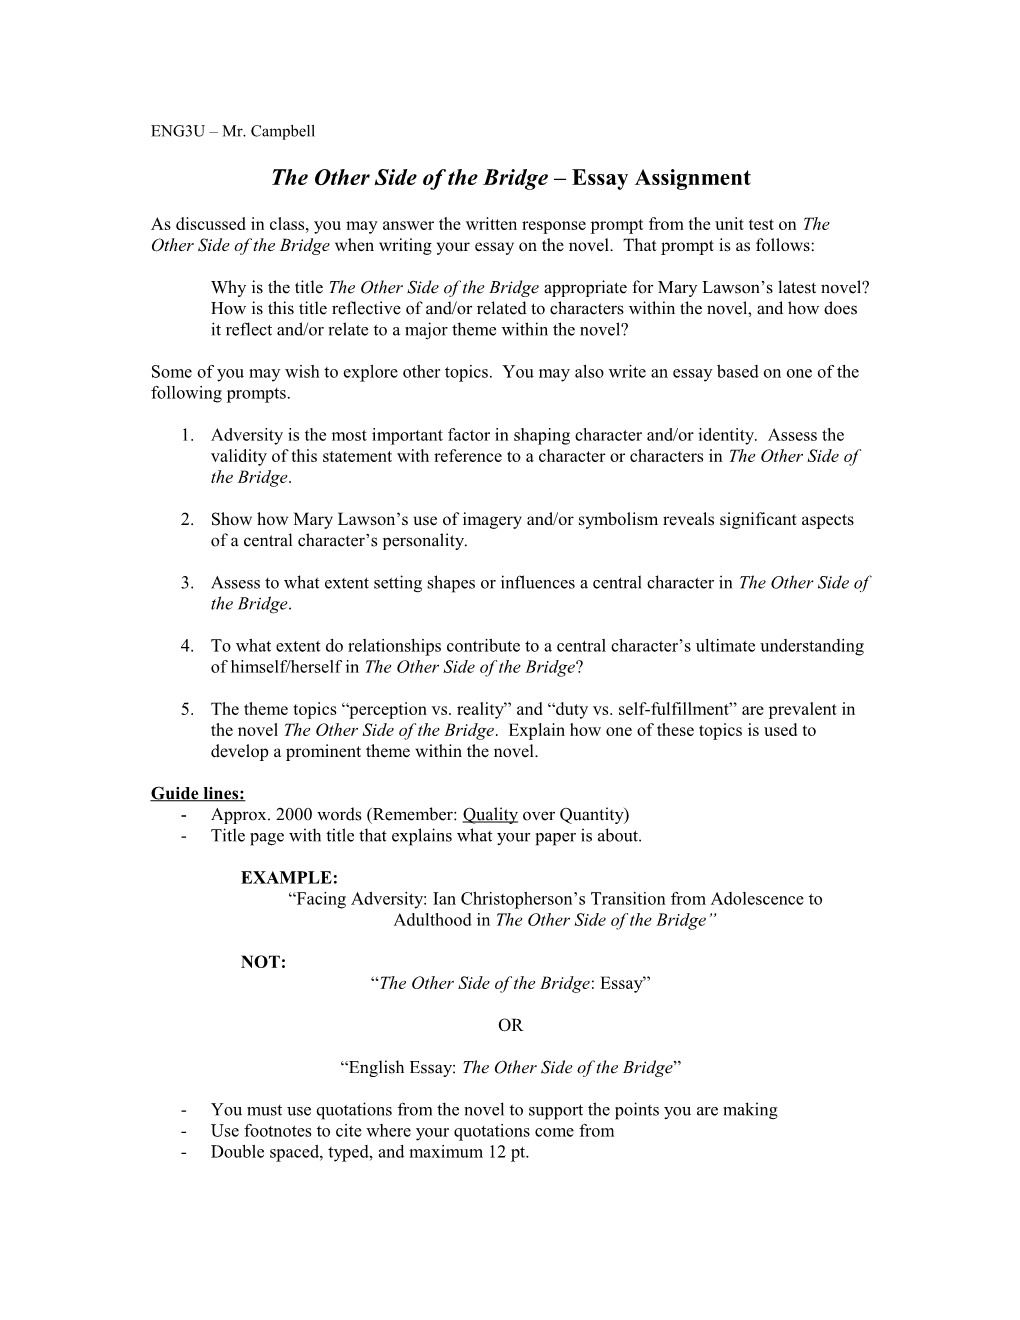 The Other Side of the Bridge Essay Assignment